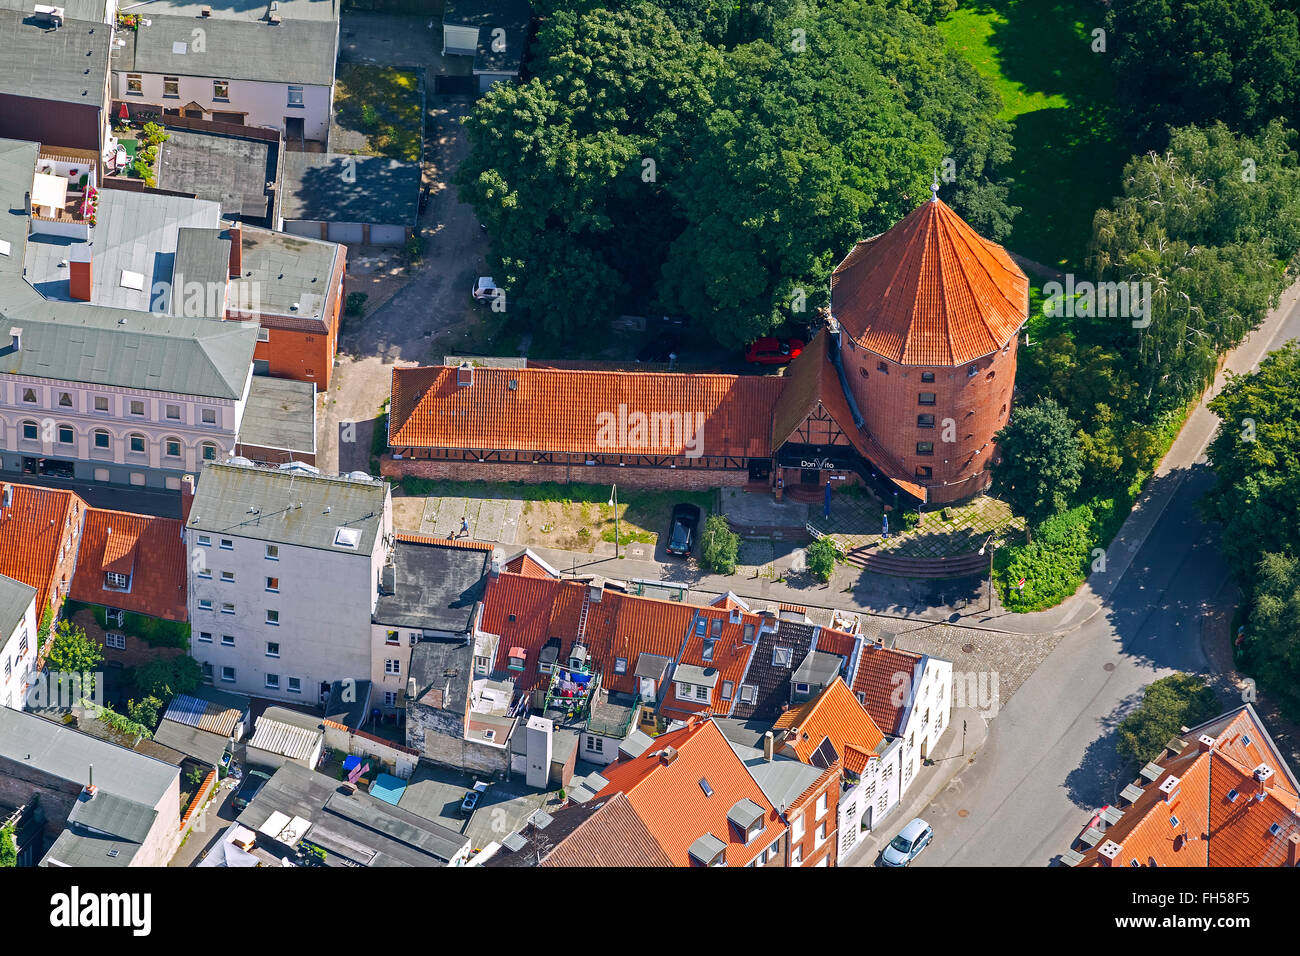 Aerial view, Don Vito on Tower Pizzeria Ristorante, Old Town of Lübeck, Lübeck, Baltic Sea, Schleswig Holstein, Germany, Europe, Stock Photo